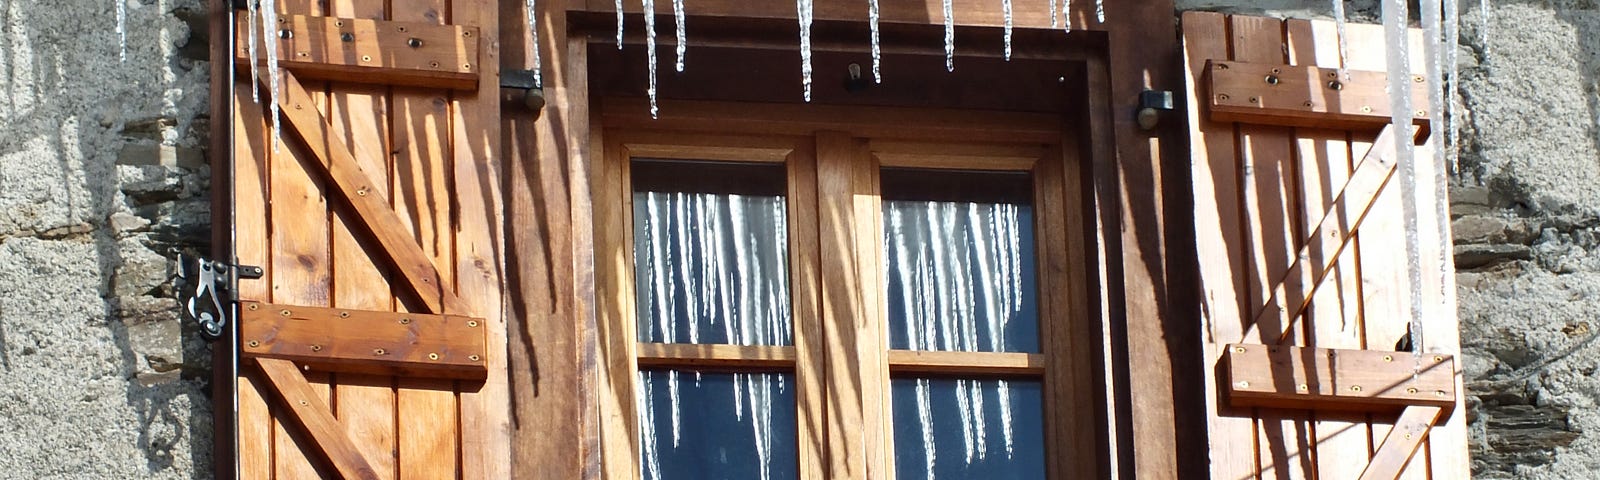 Brown wooden shutters open either side of a window, with long, thin icicles hanging from the roof.